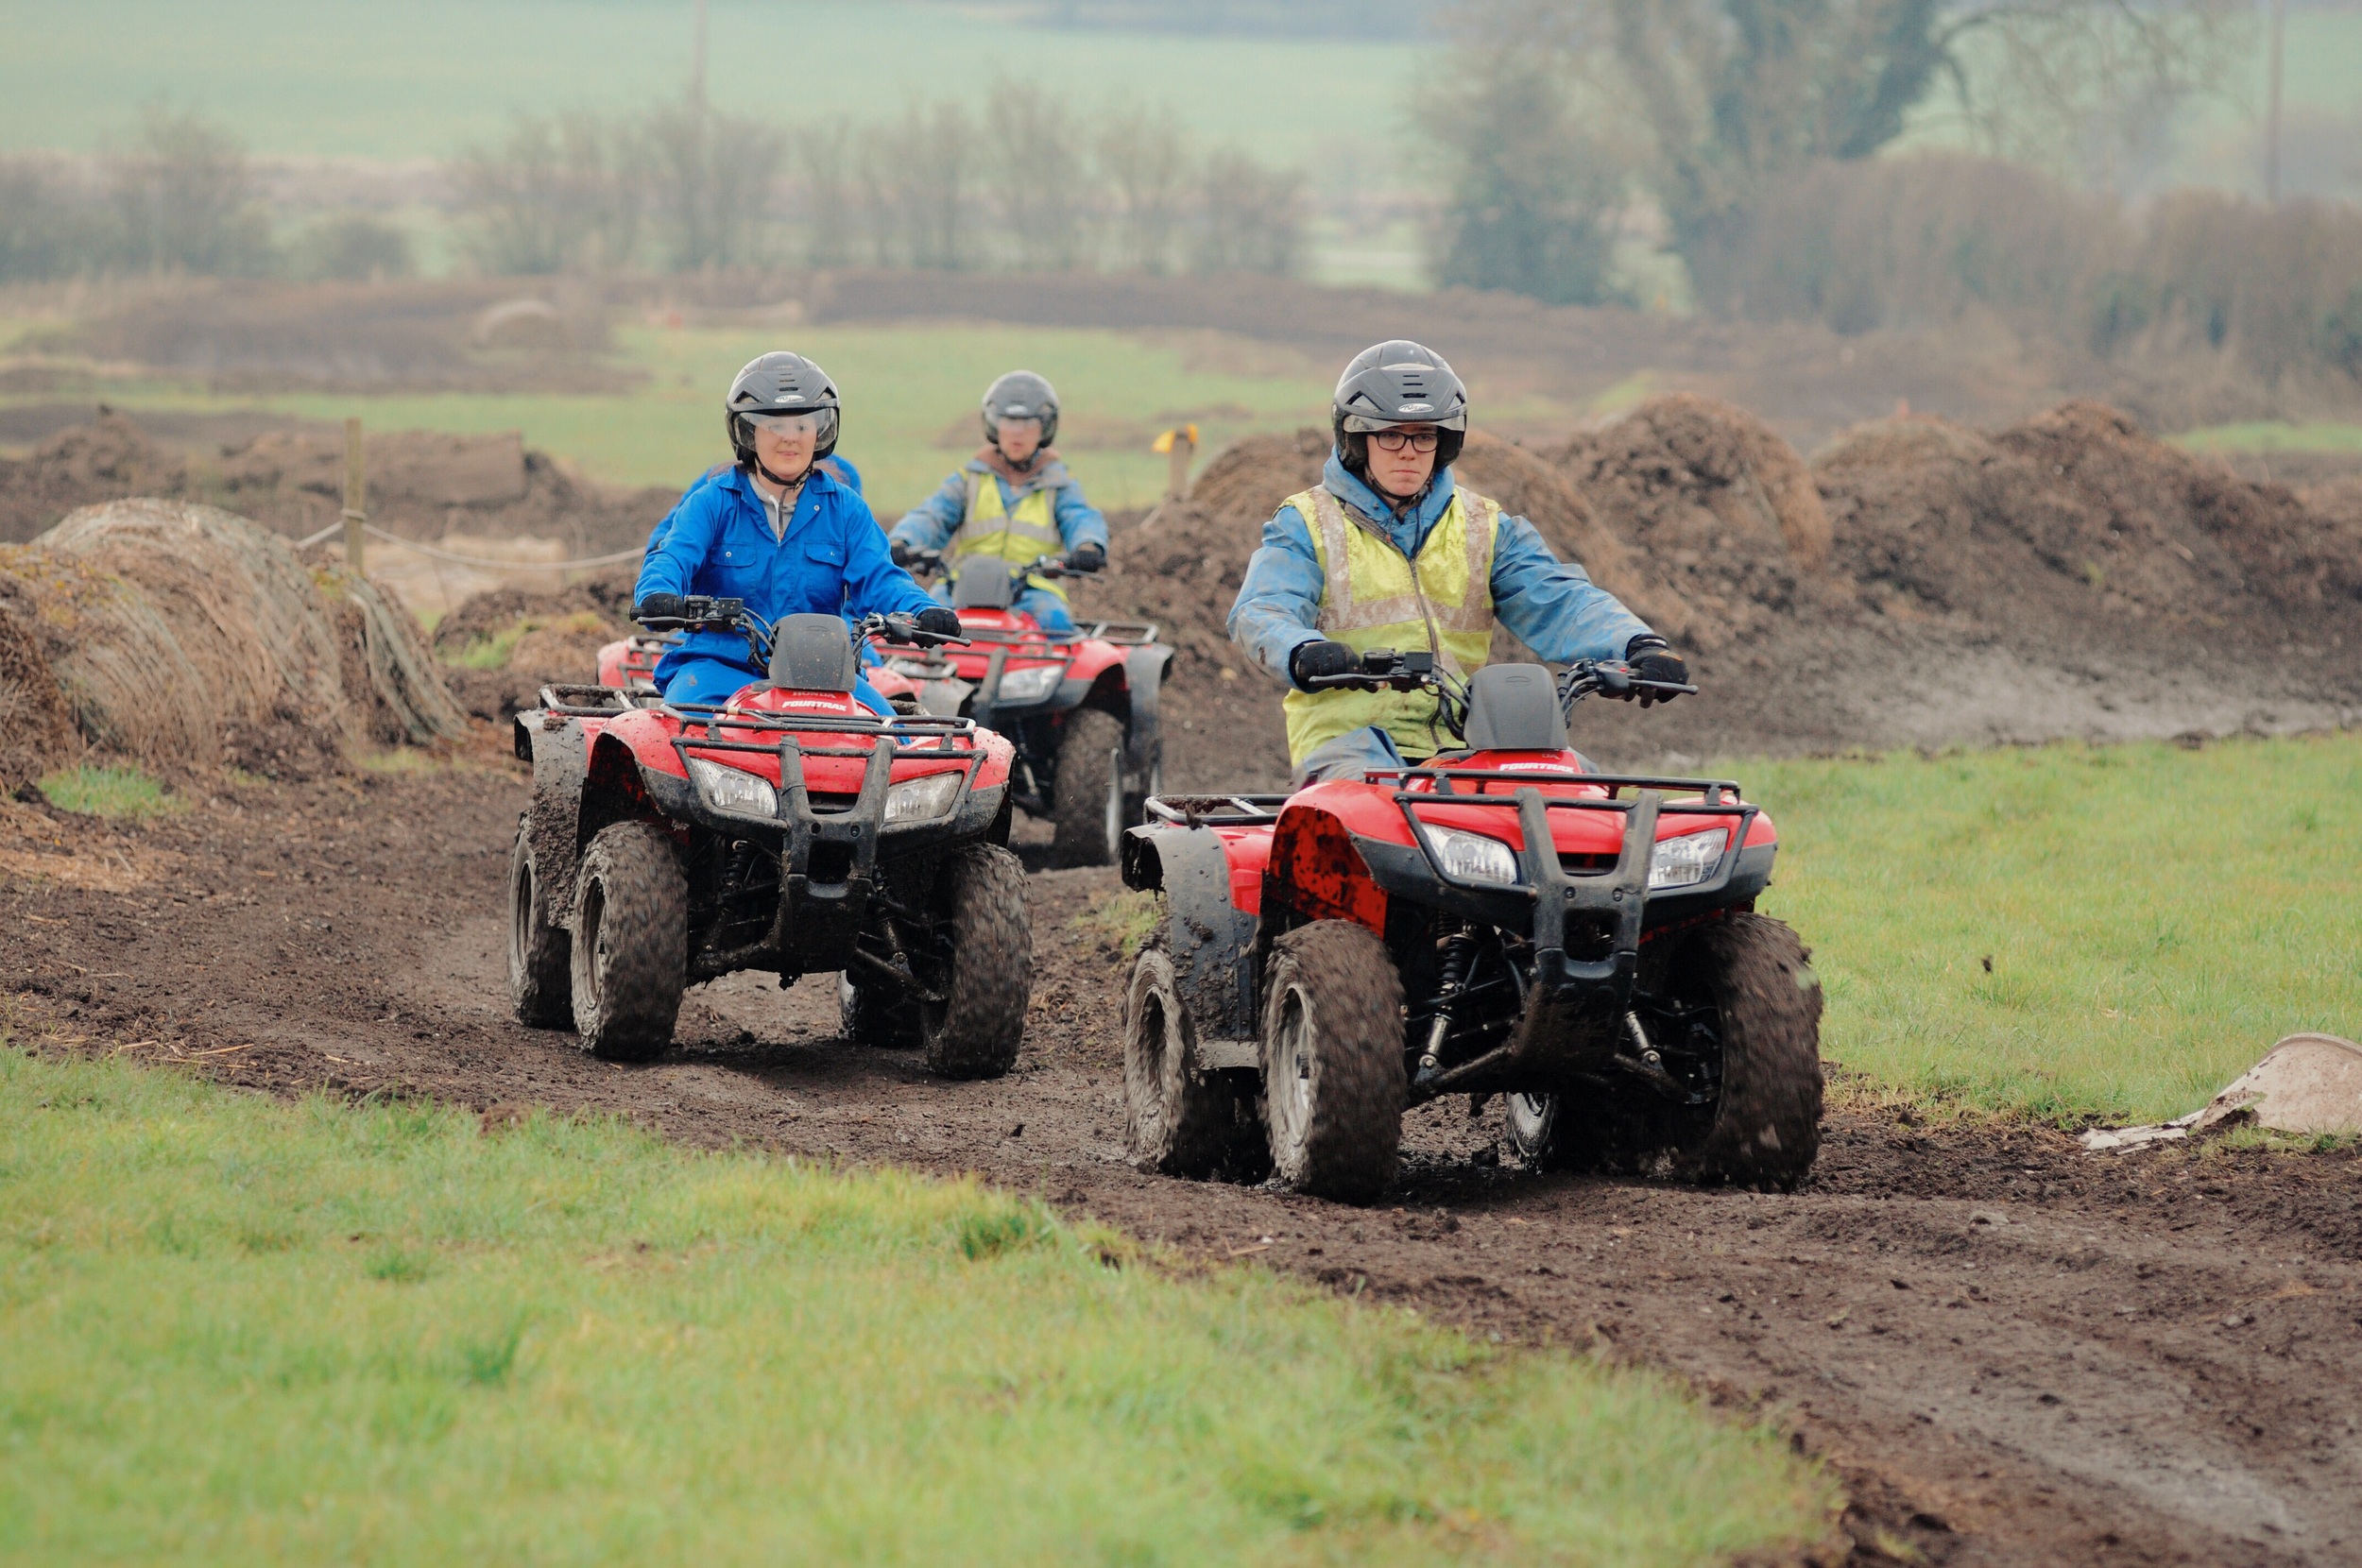 Track Riding with Easi Qualified ATV instructors